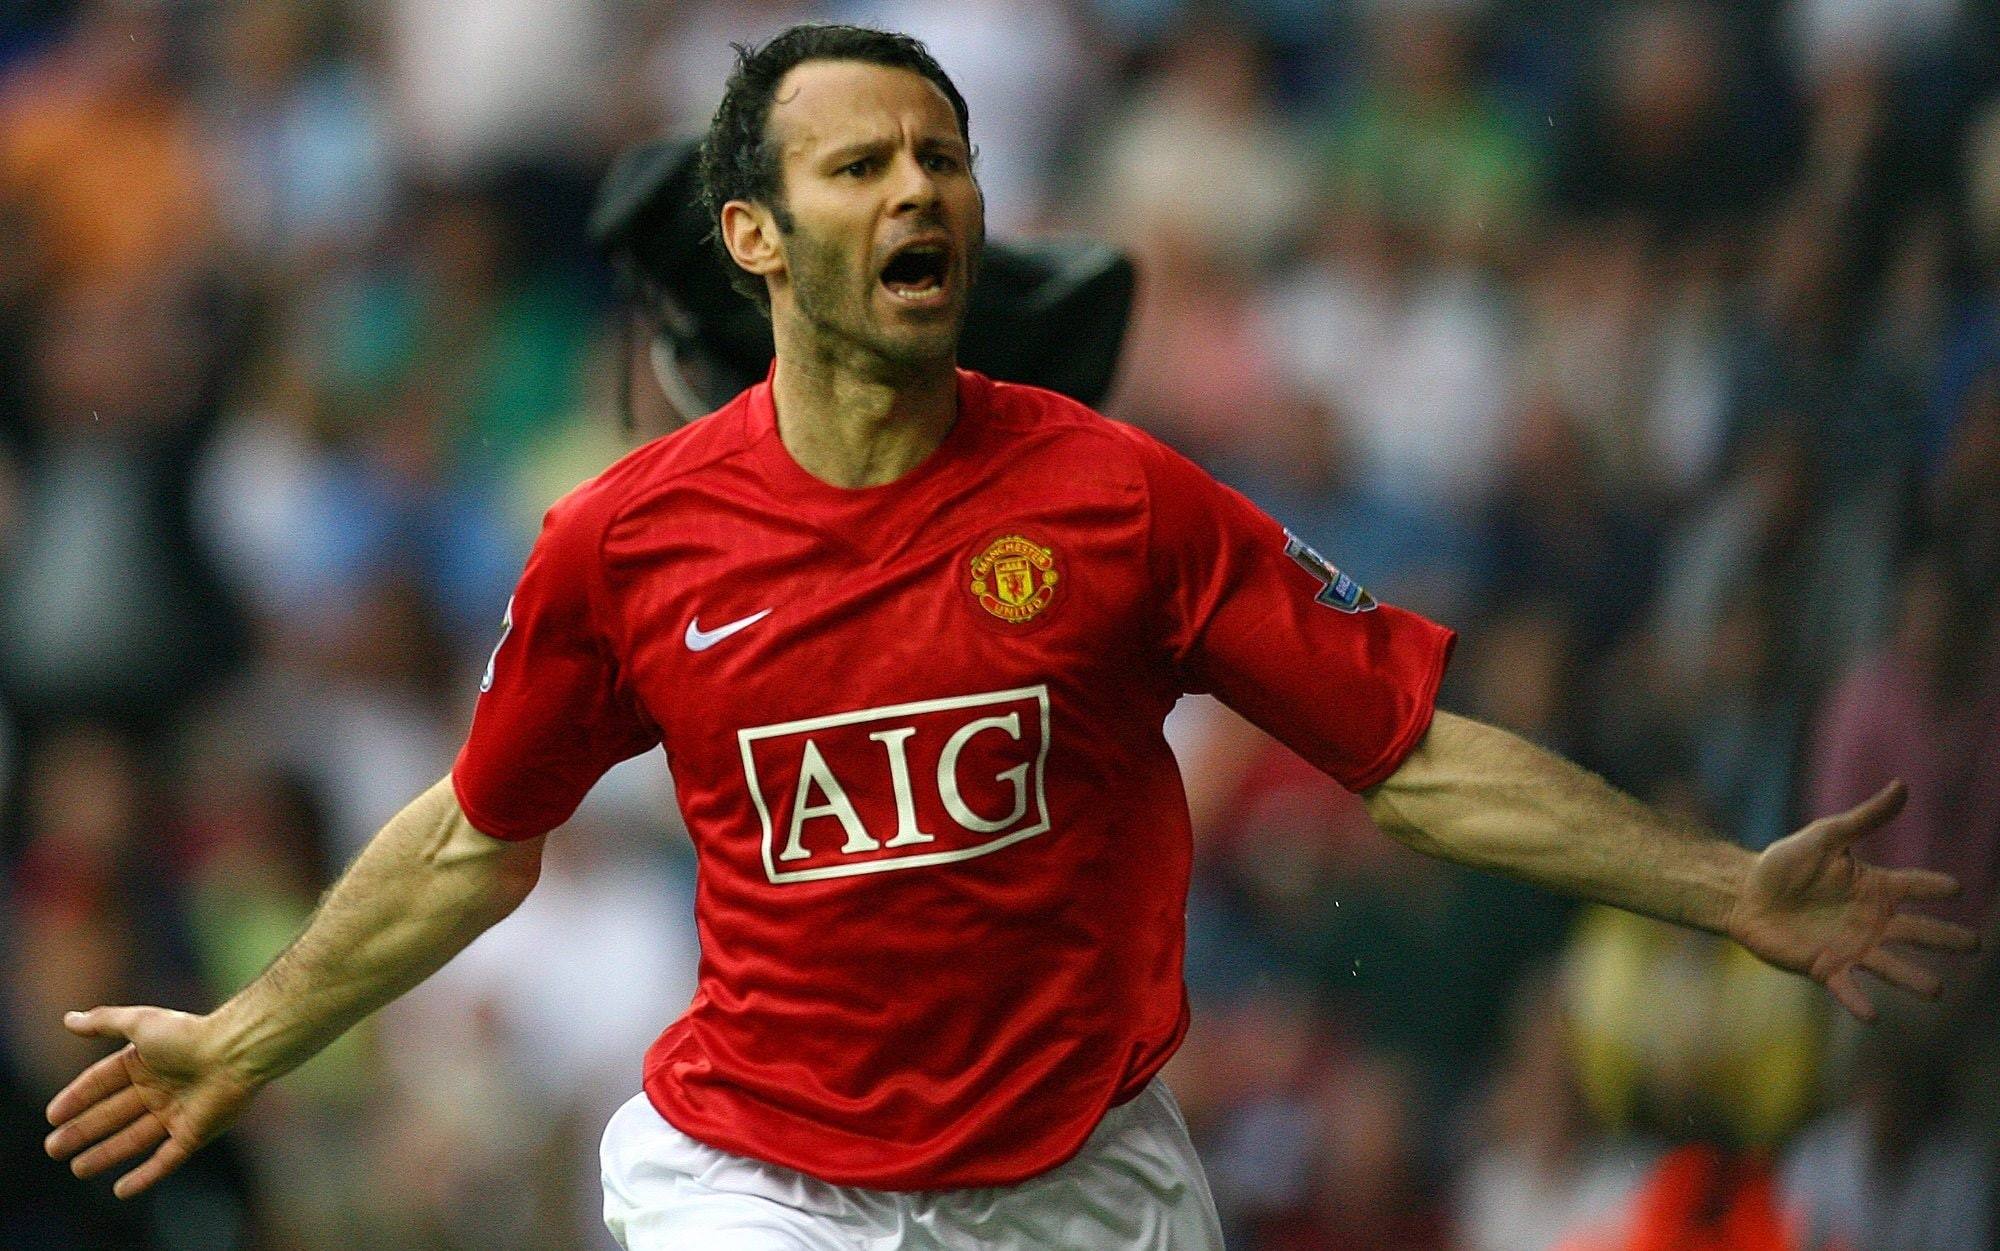 14 Facts About Ryan Giggs - Facts.net